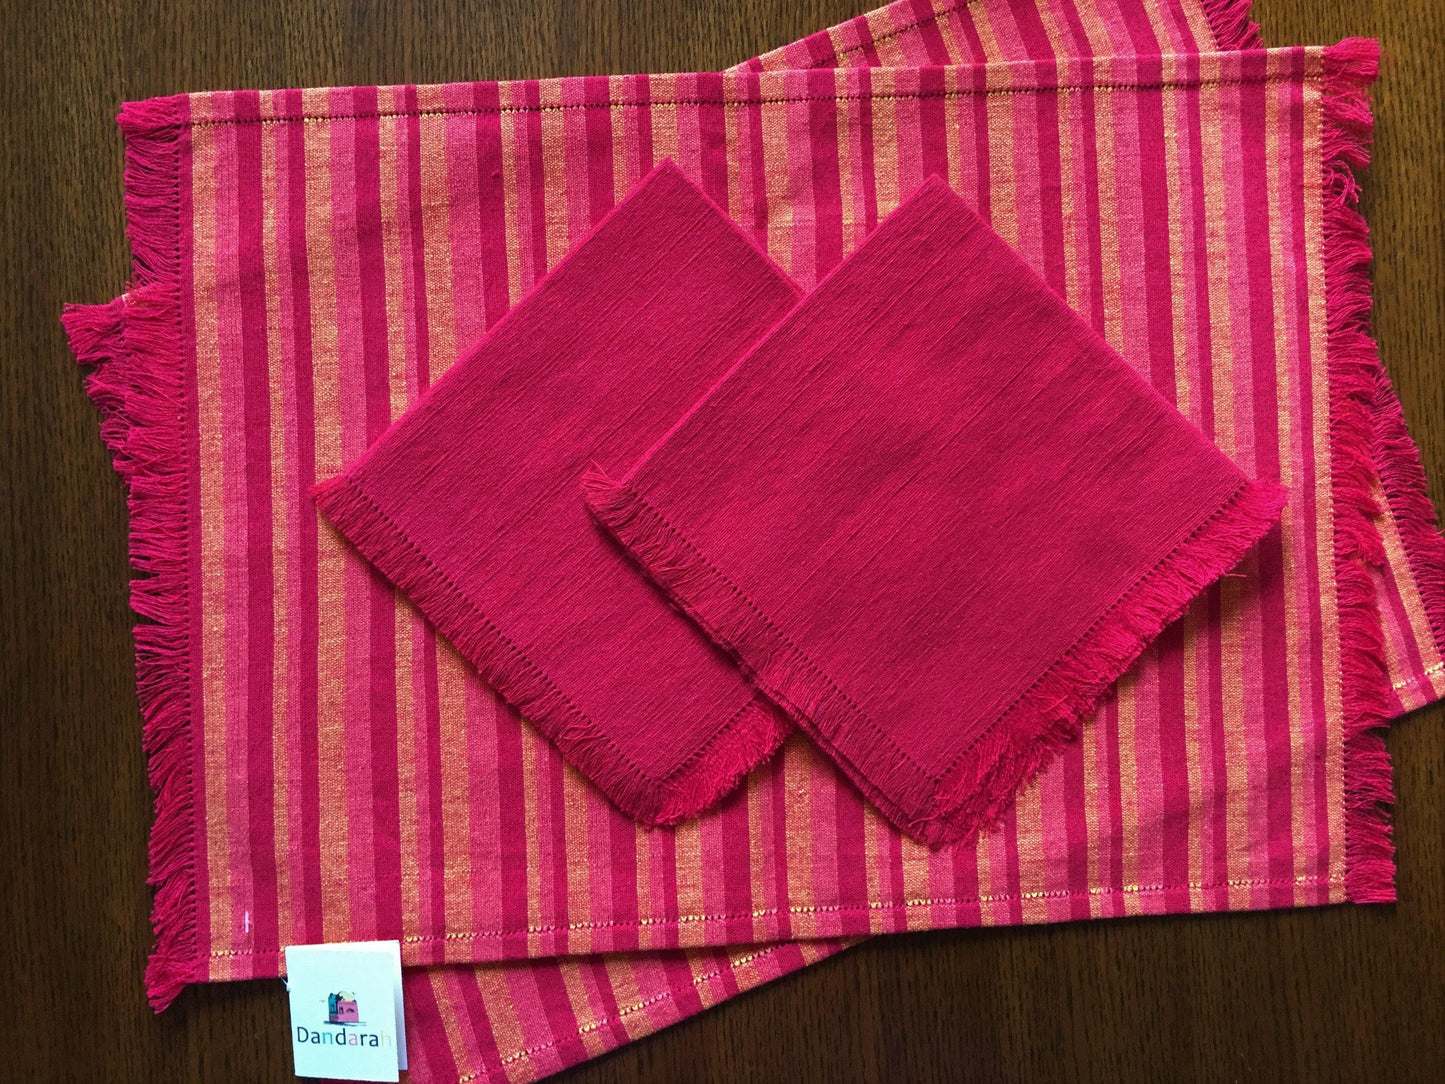 Handwoven Placemats & Napkins - Red & Orange